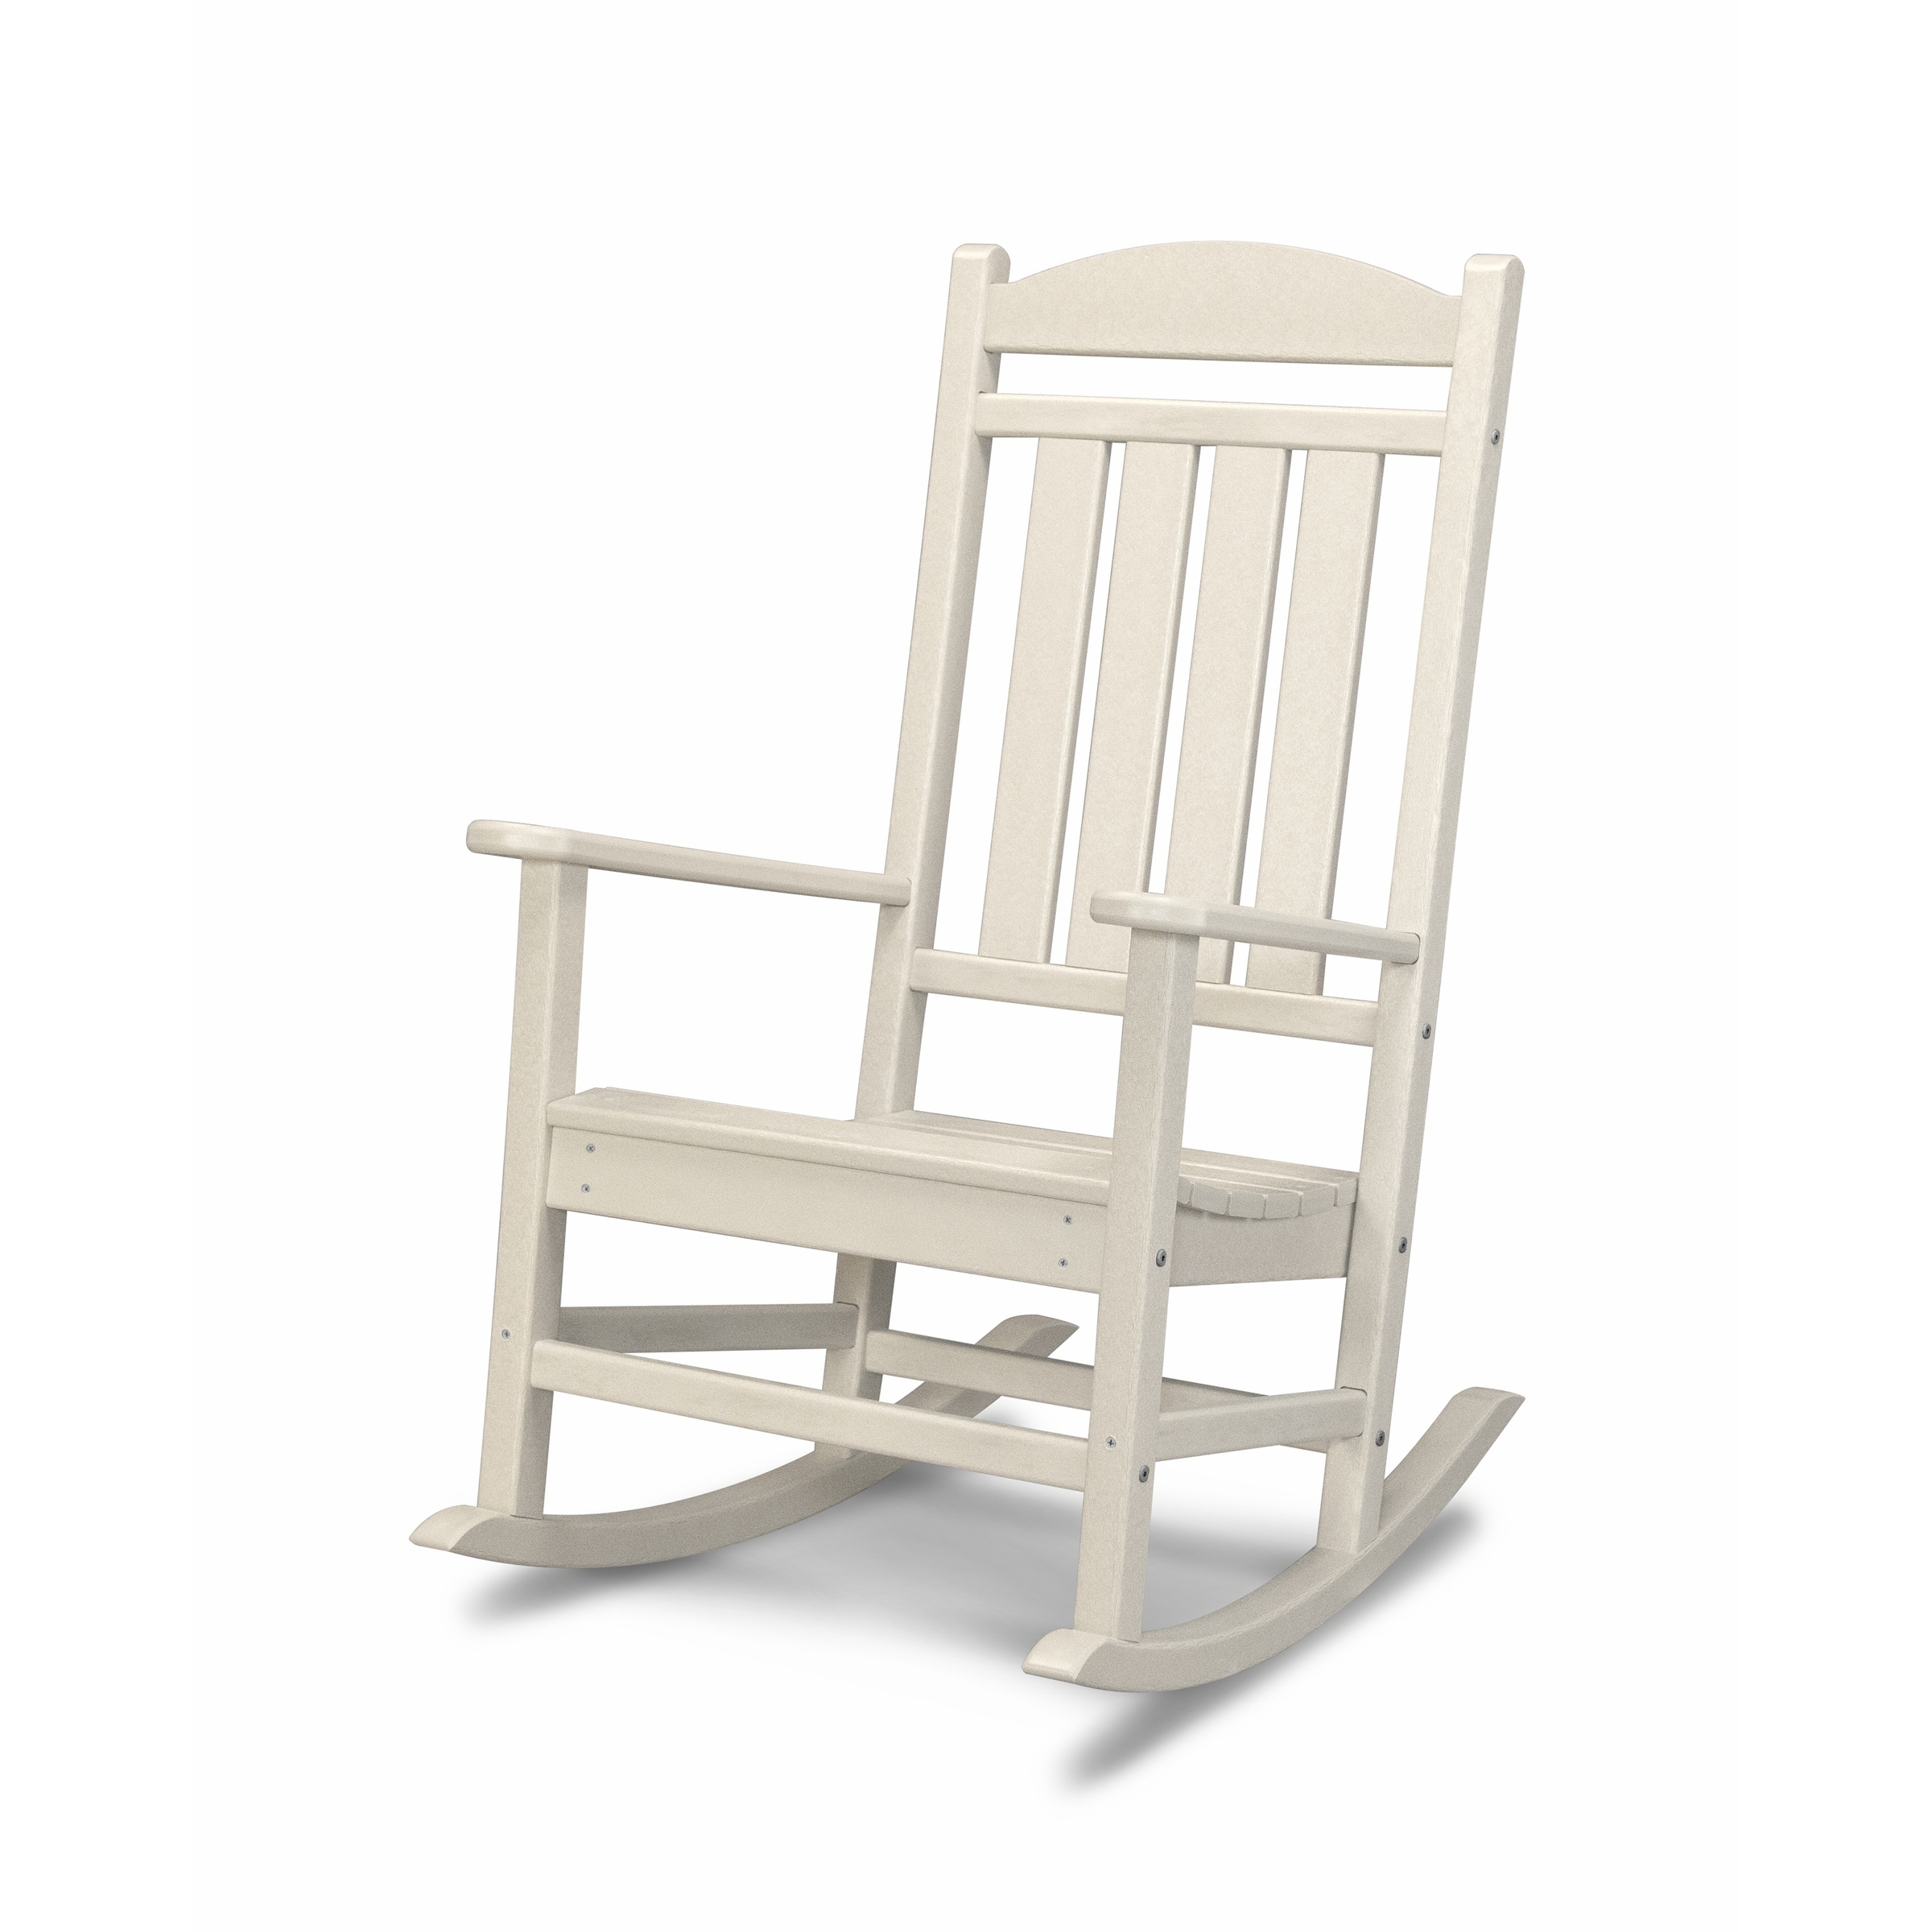 https://ak1.ostkcdn.com/images/products/is/images/direct/2e033bfda31ea137106547825f88243a7c88c2f5/POLYWOOD%C2%AE-Presidential-Outdoor-Rocking-Chair.jpg